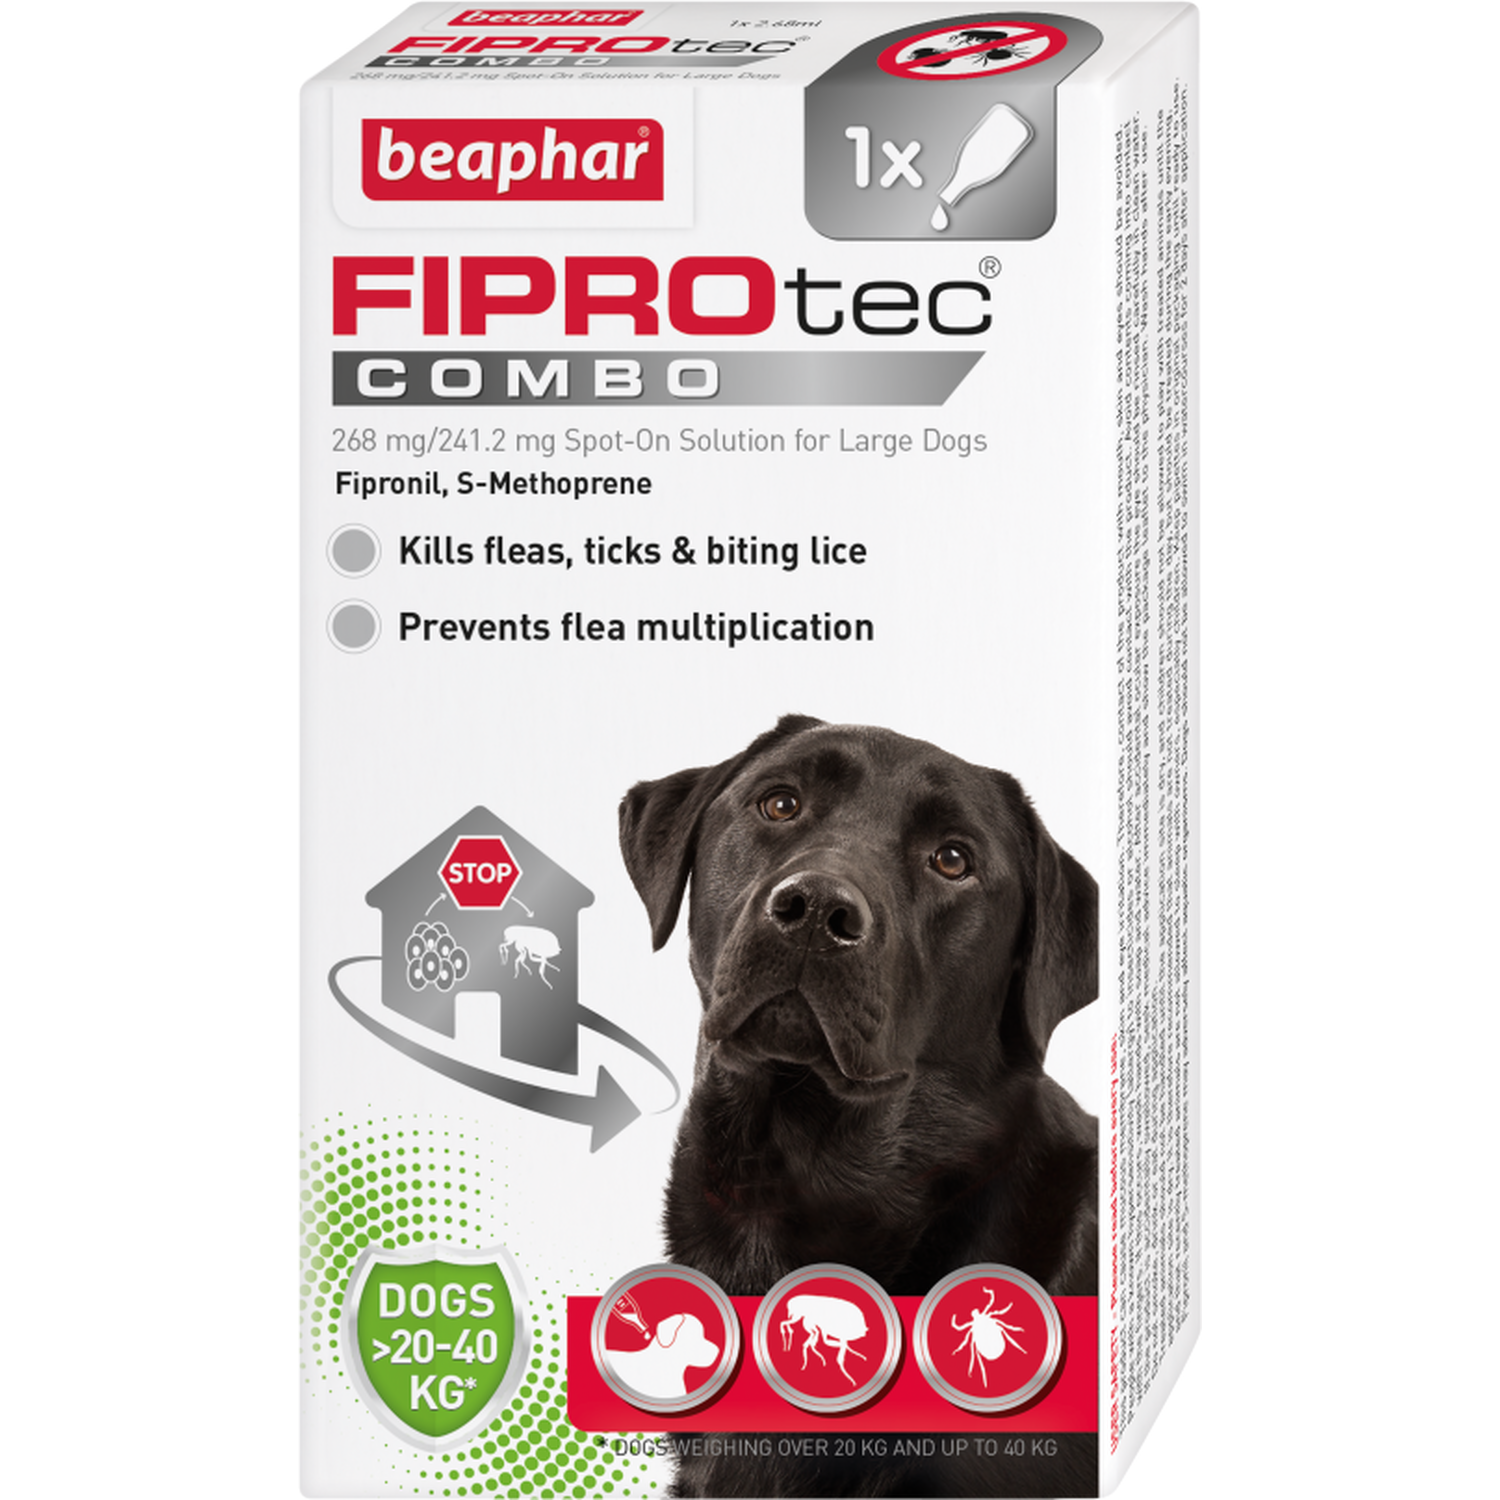 FIPROtec Combo Spot On for Dogs - Large Breed Image